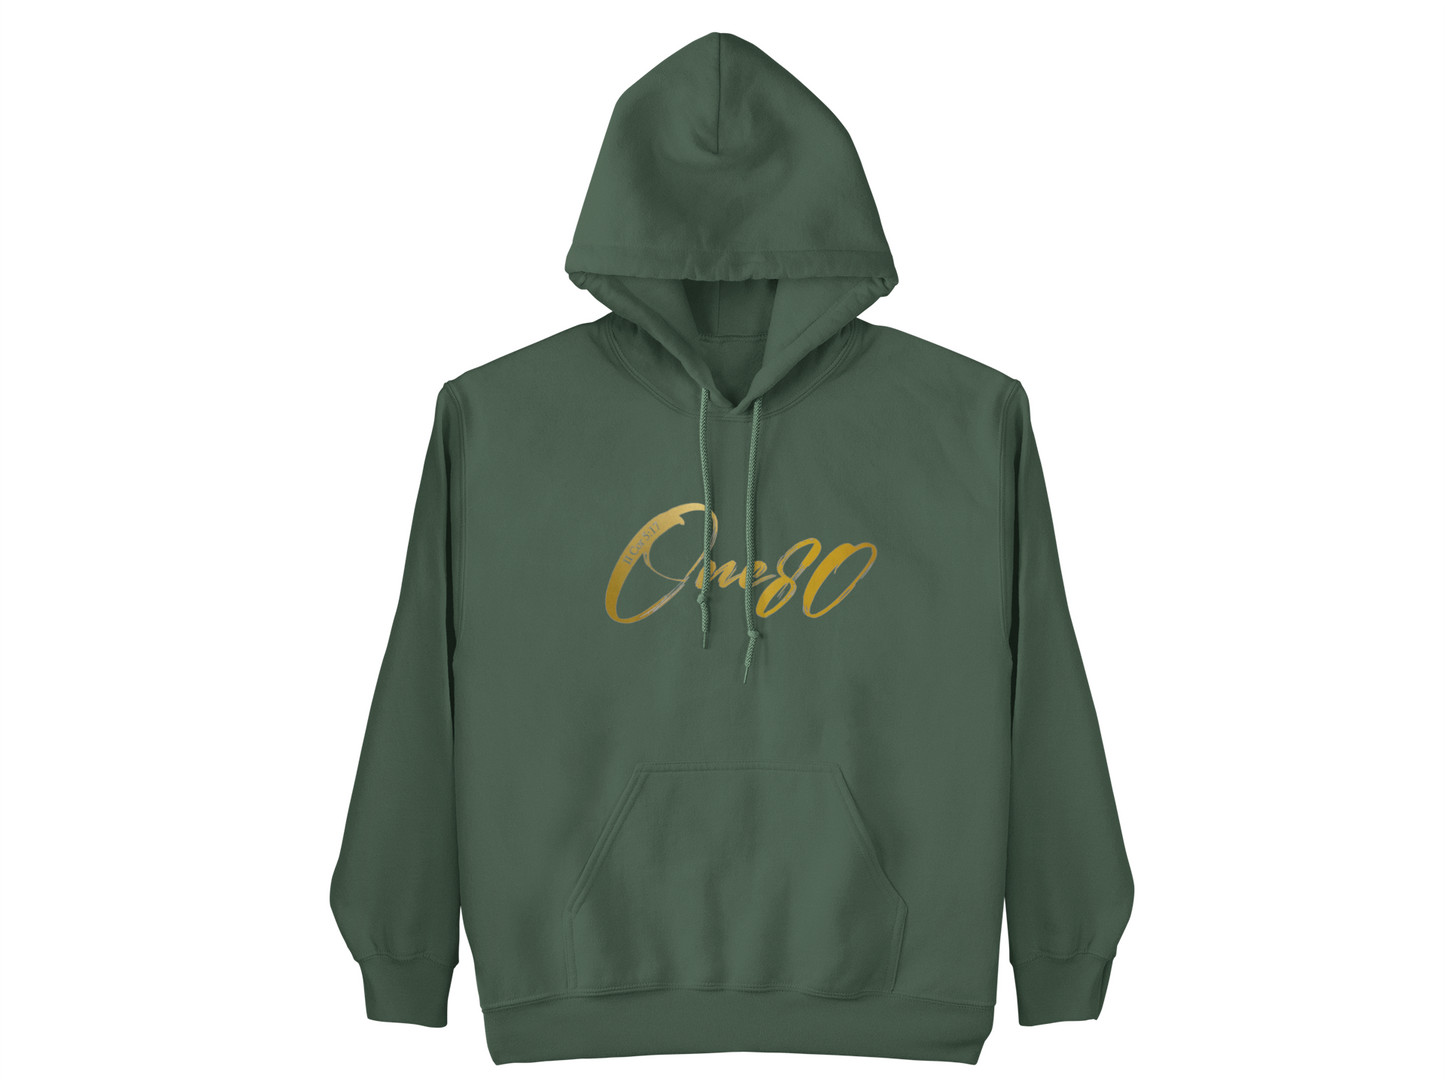 One80 Hoodie (Assorted Colors)